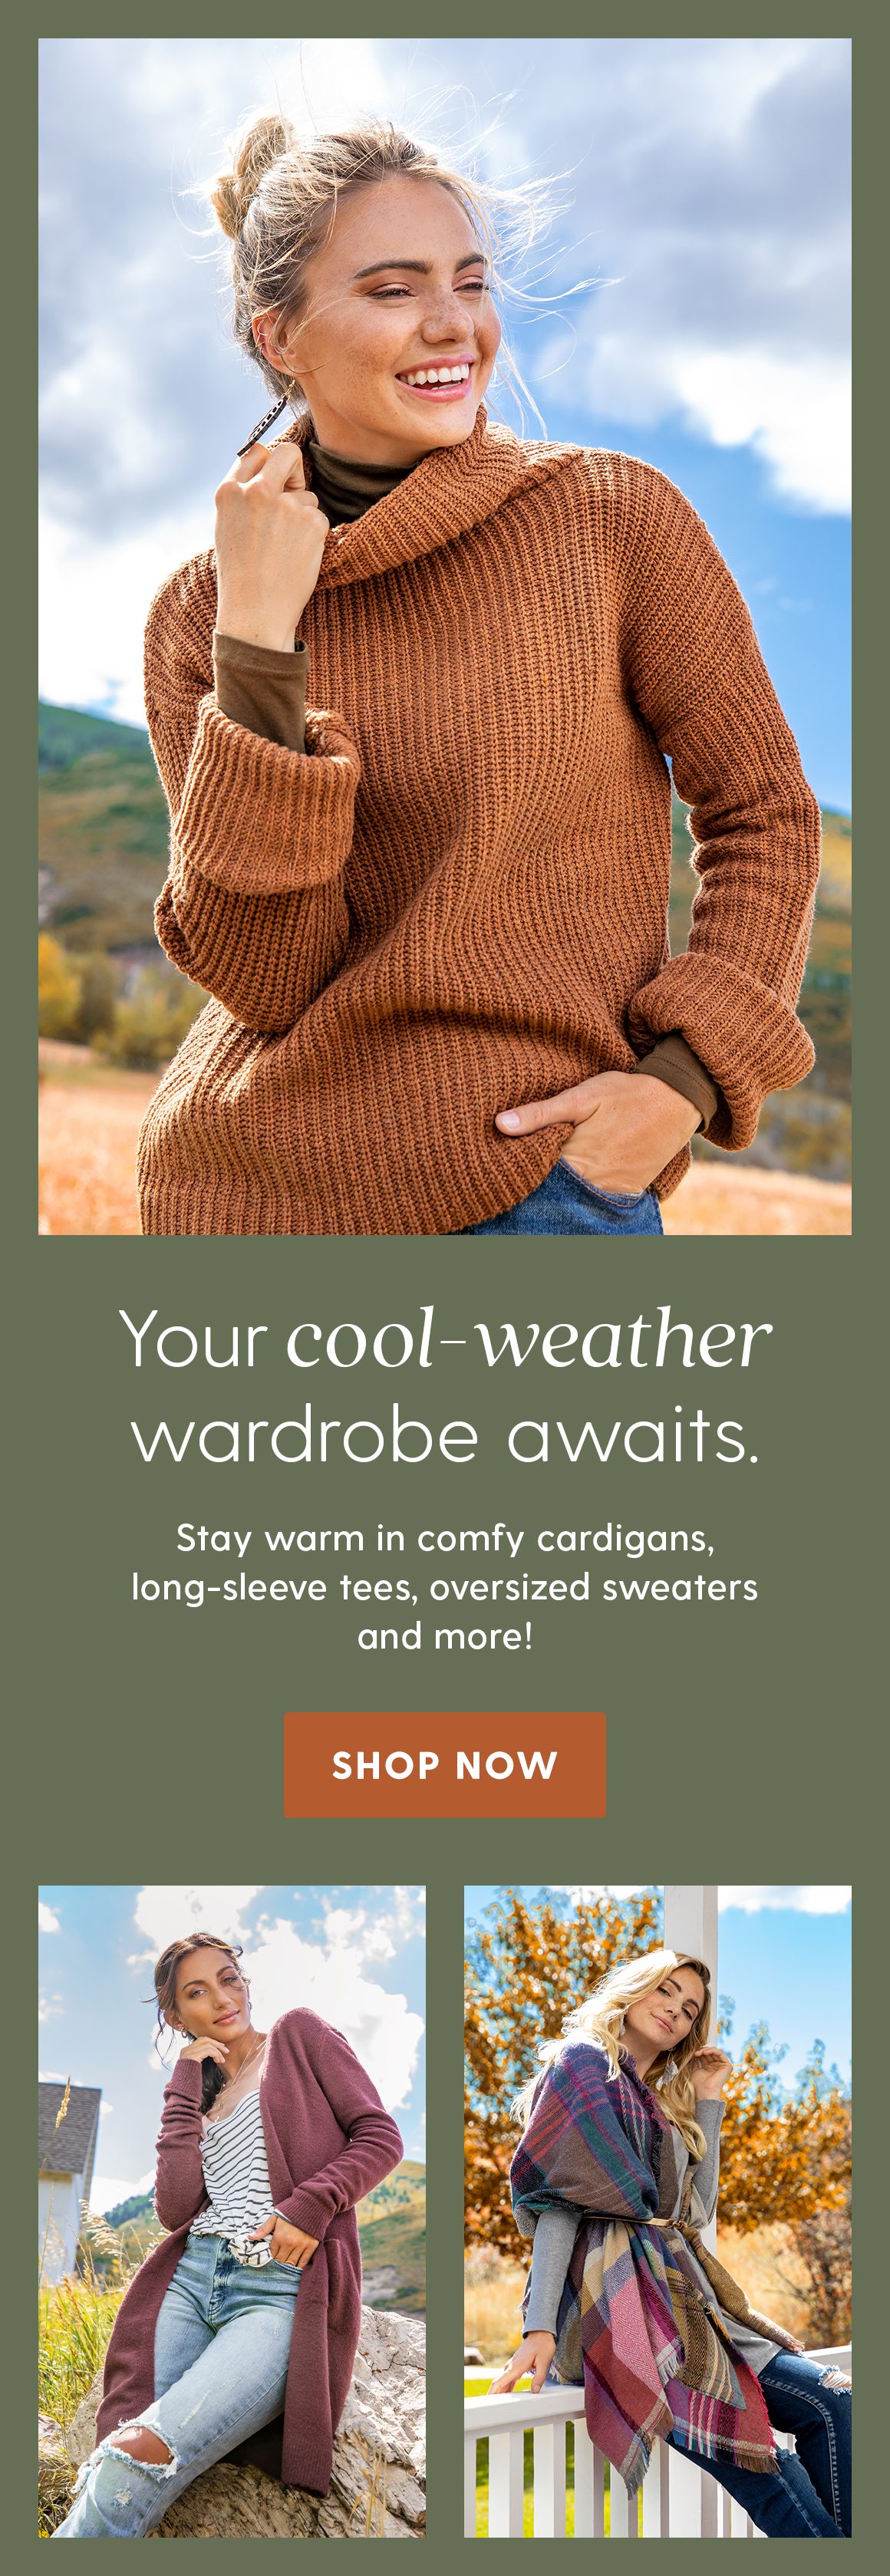 Your cool-weather wardrobe awaits. Stay warm in comfy cardigans, long-sleeve tees, oversized sweaters and more! Shop now. 